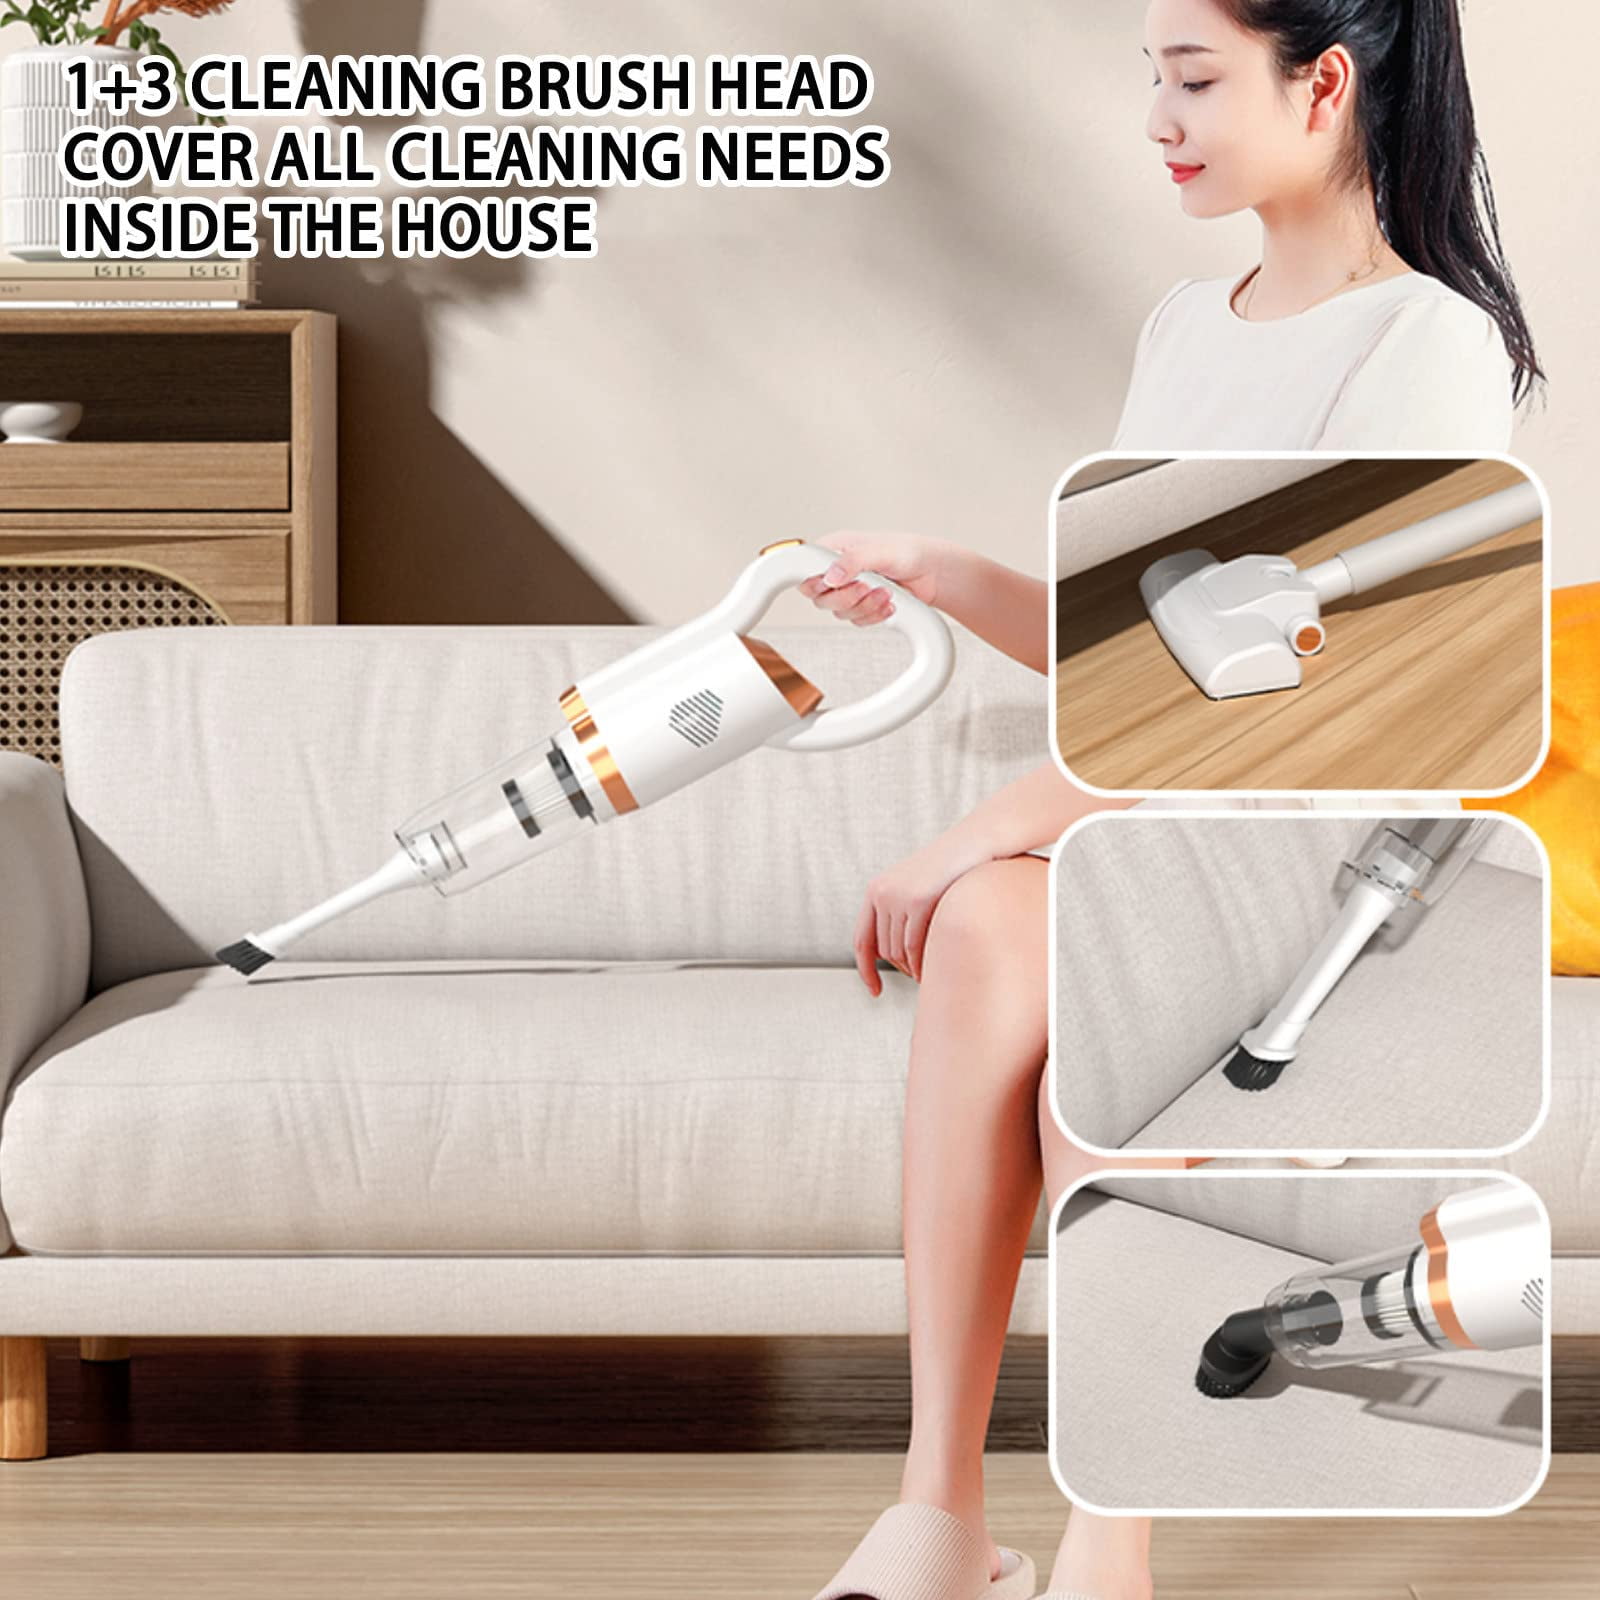 Duronic VC8/BK Stick Vacuum Cleaner, Energy Class A+